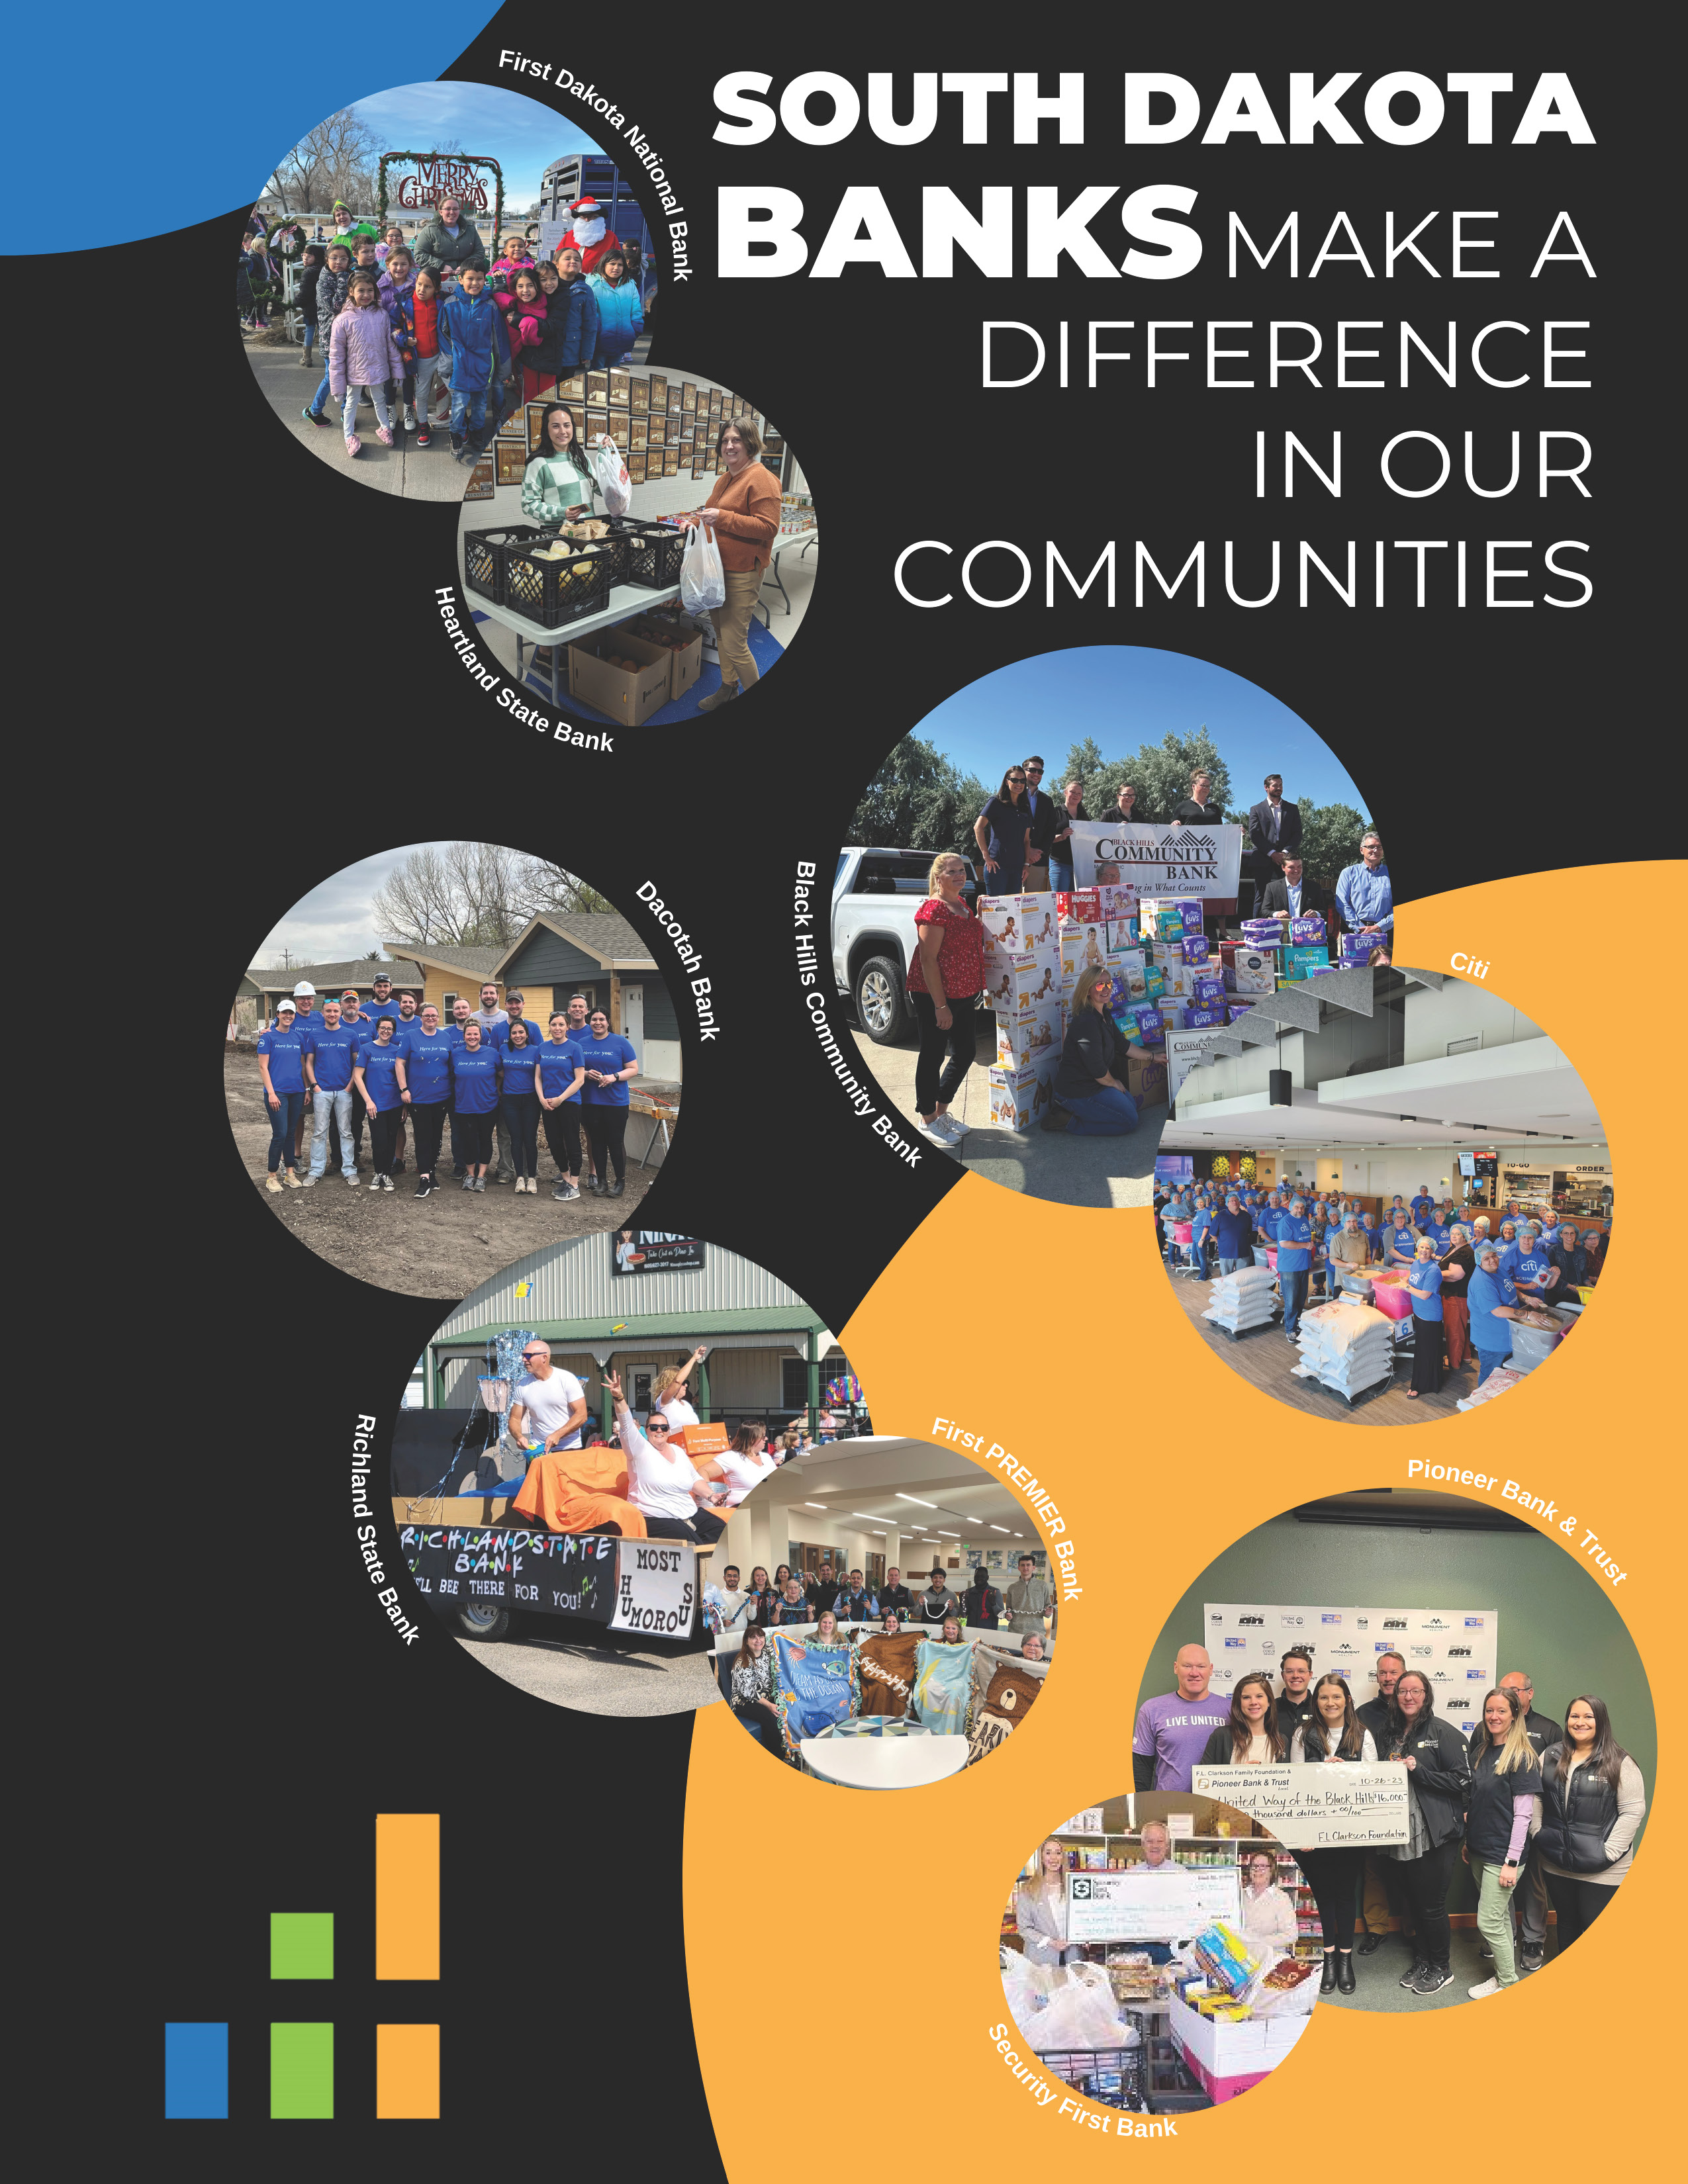 South Dakota Banks Make a Difference in Our Communities